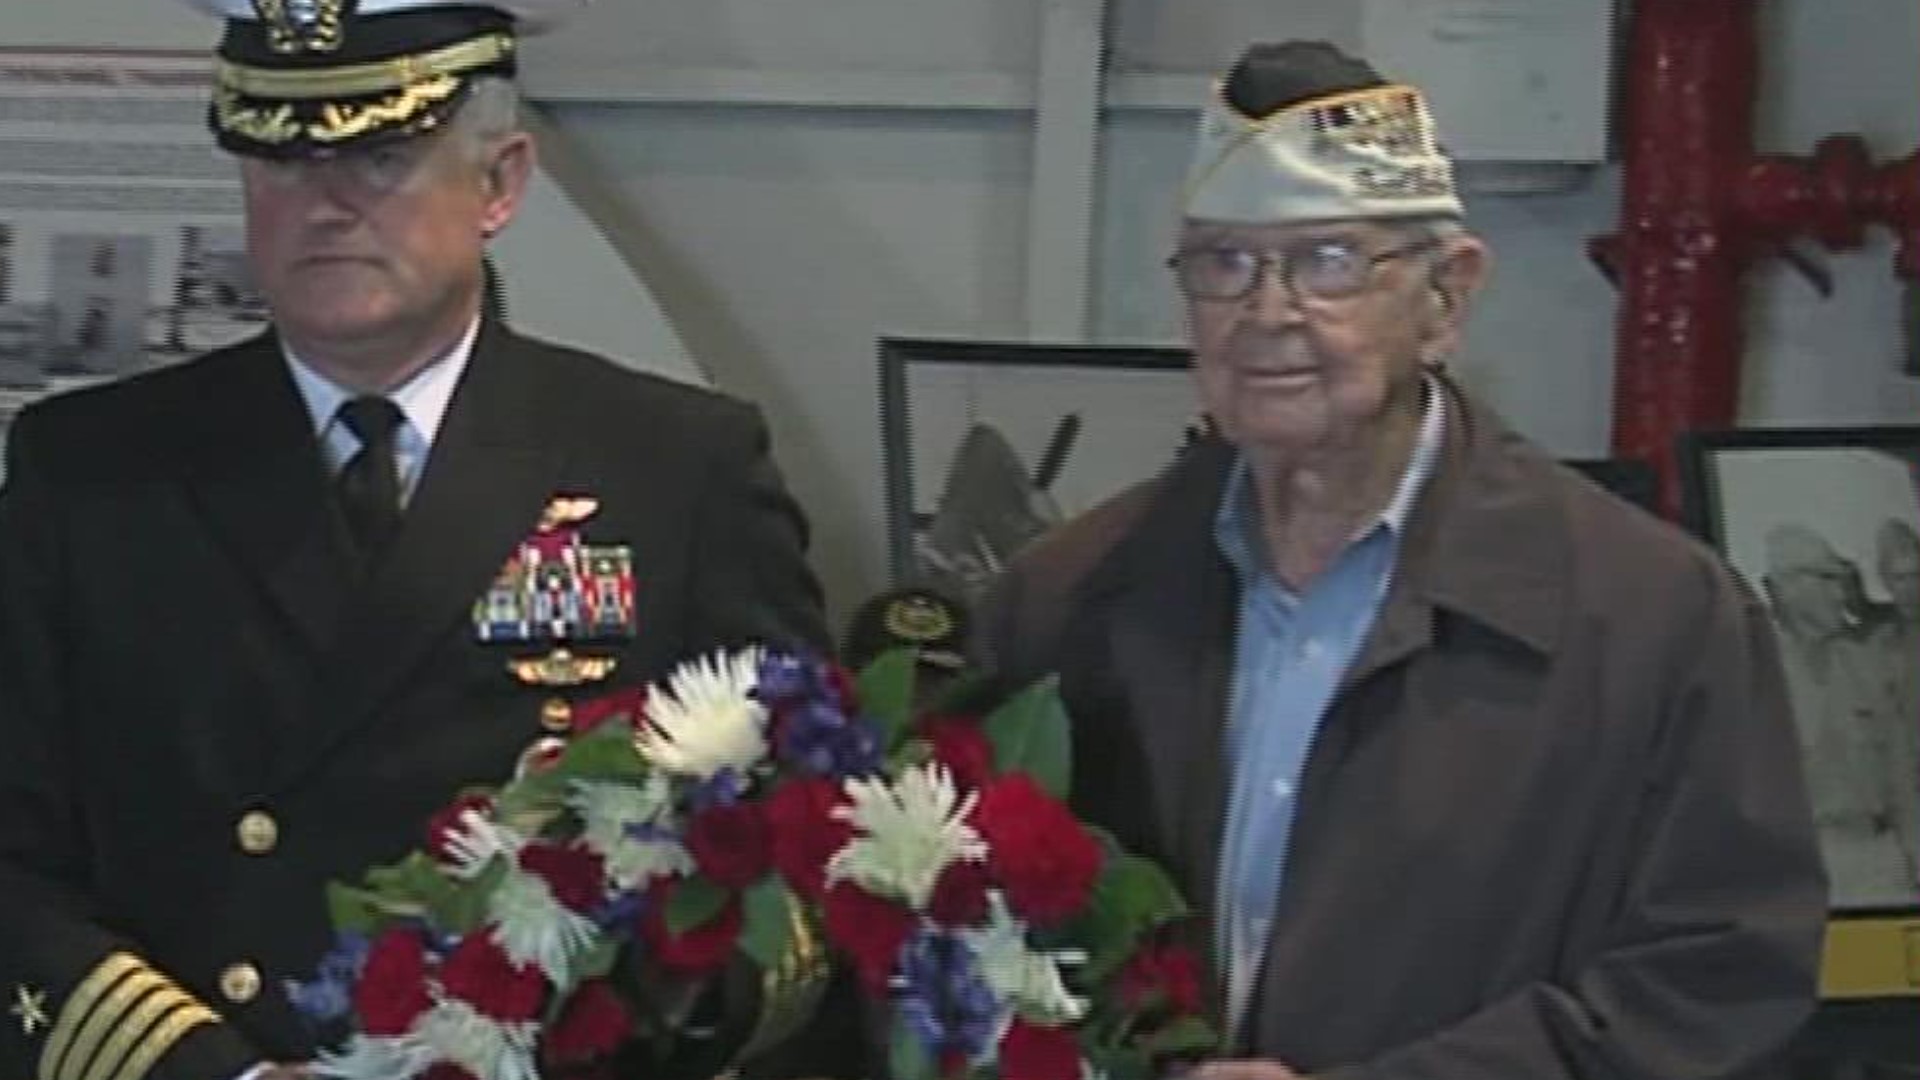 There will be a Pearl Harbor wreath laying Ceremony on USS Lexington today, the 81st anniversary of the attack.